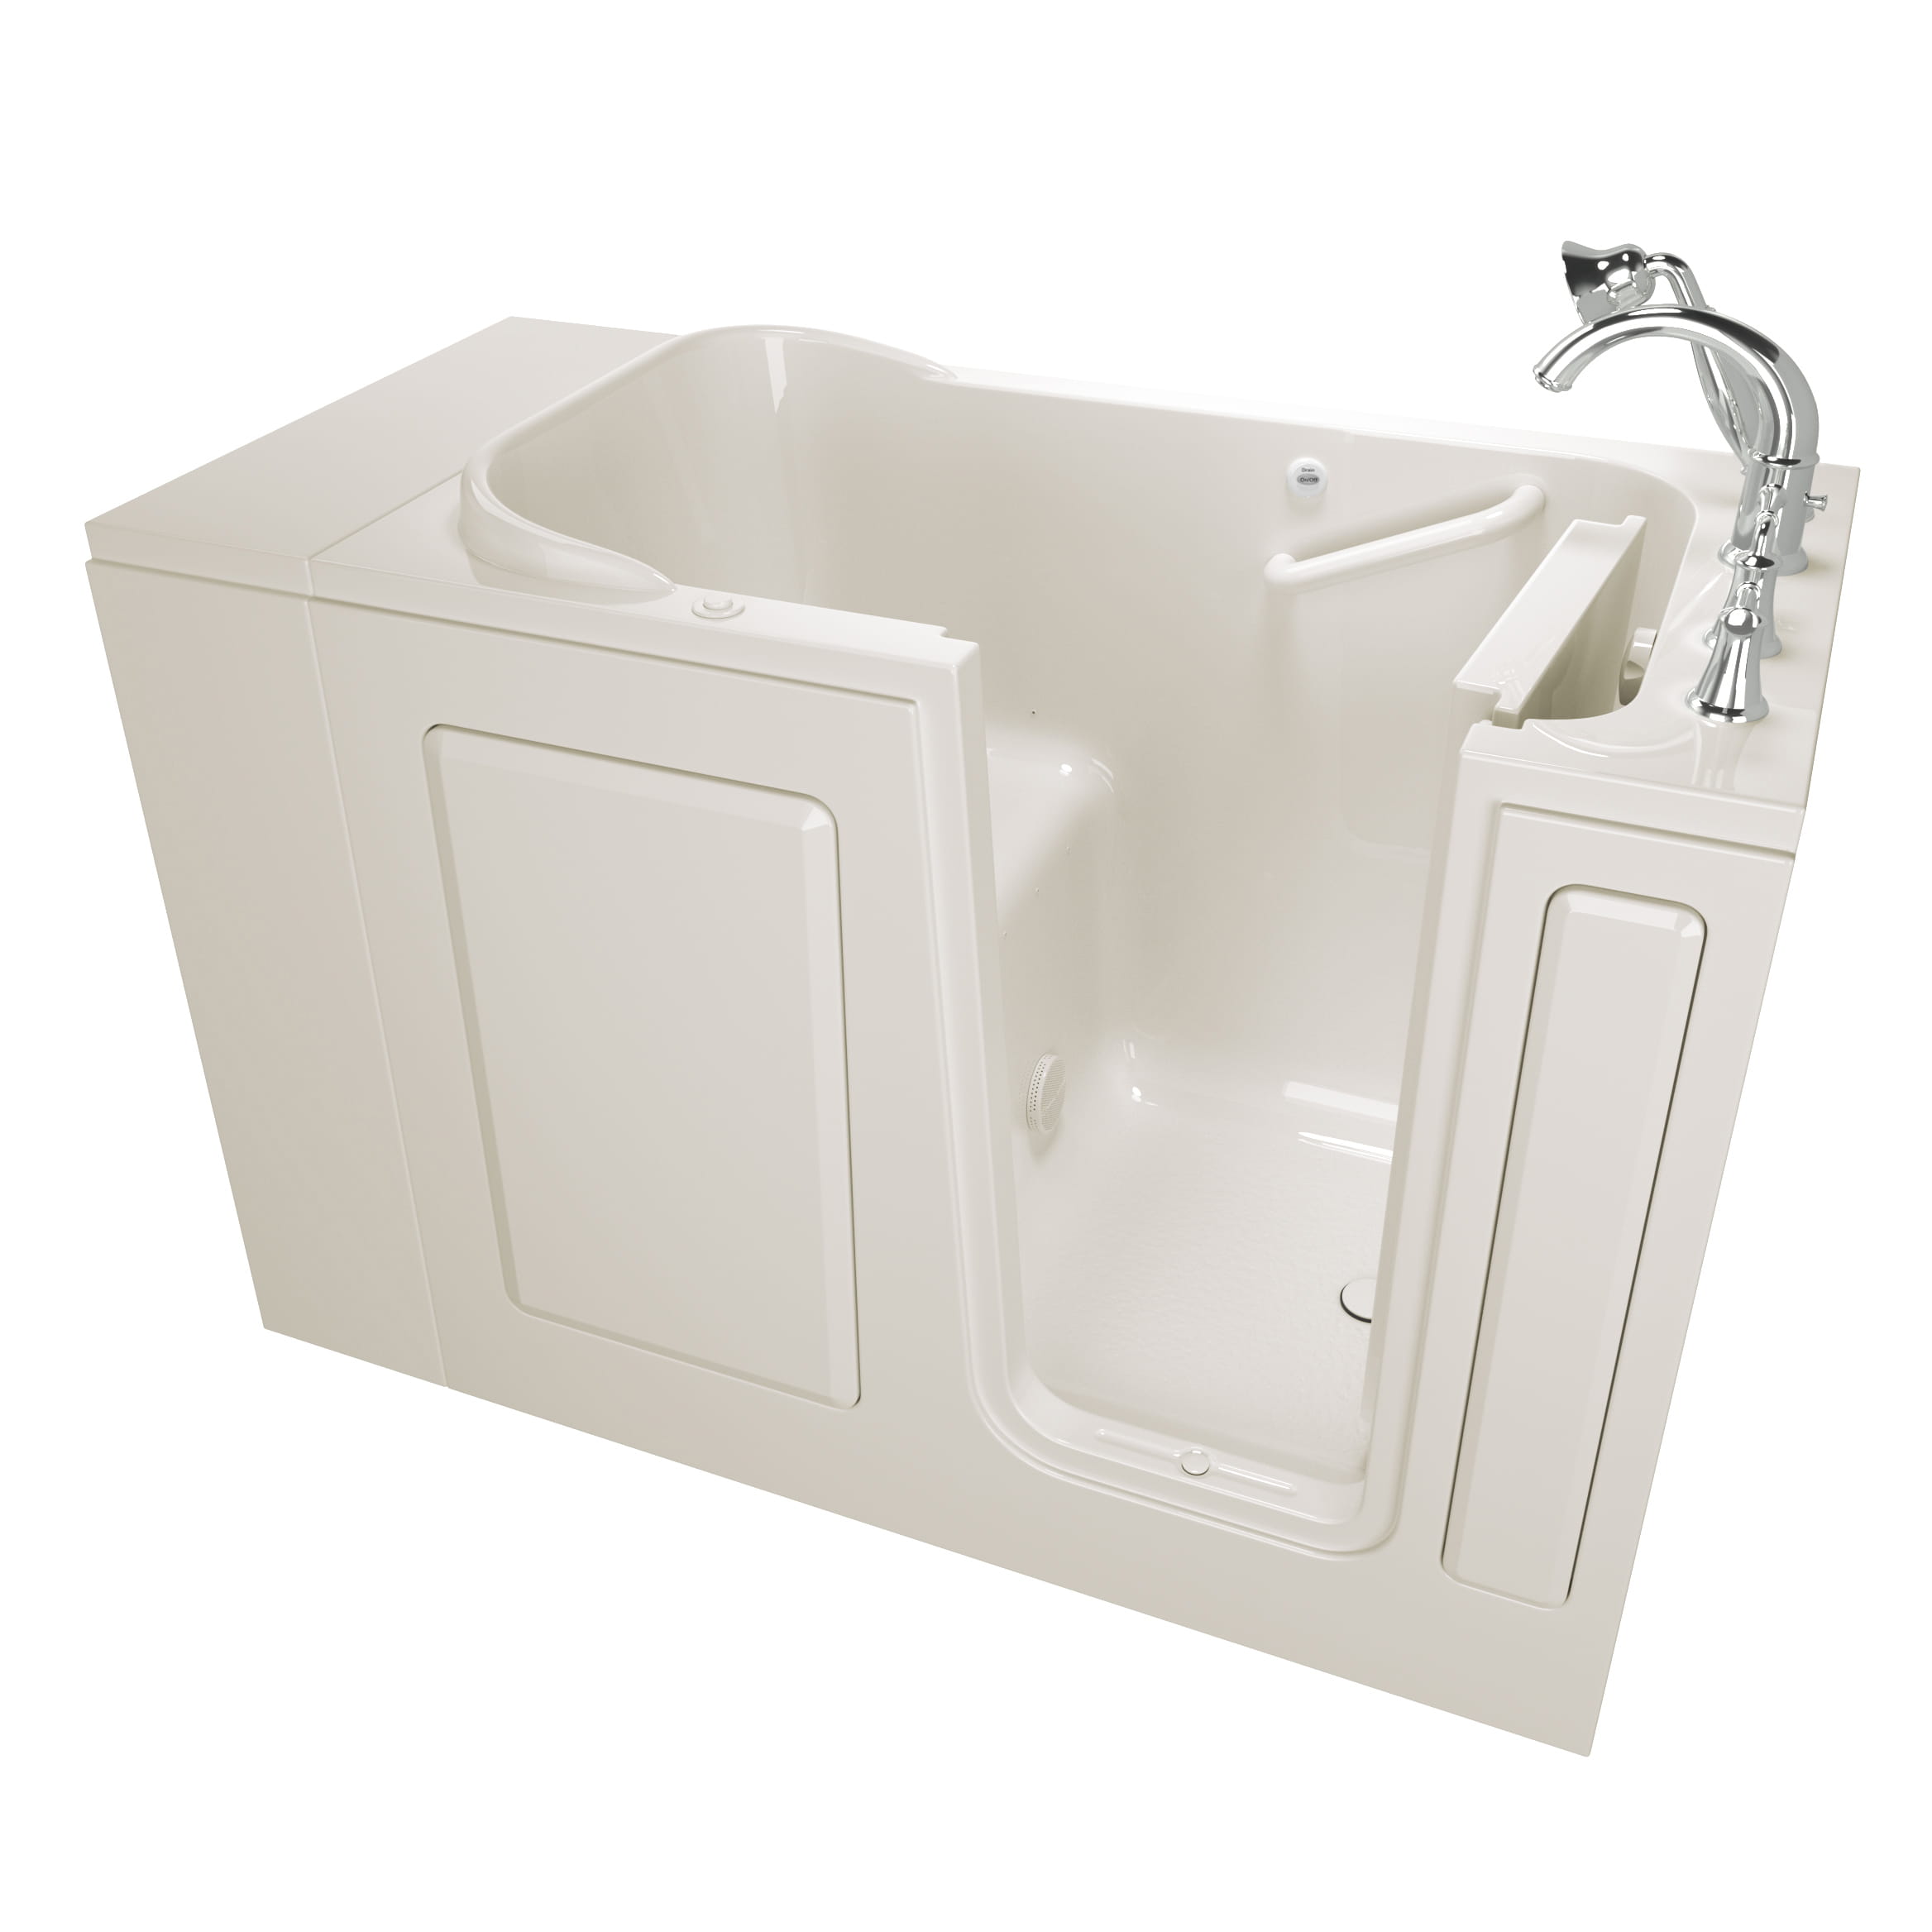 Gelcoat Value Series 28 x 48-Inch Walk-in Tub With Air Spa System - Right-Hand Drain With Faucet